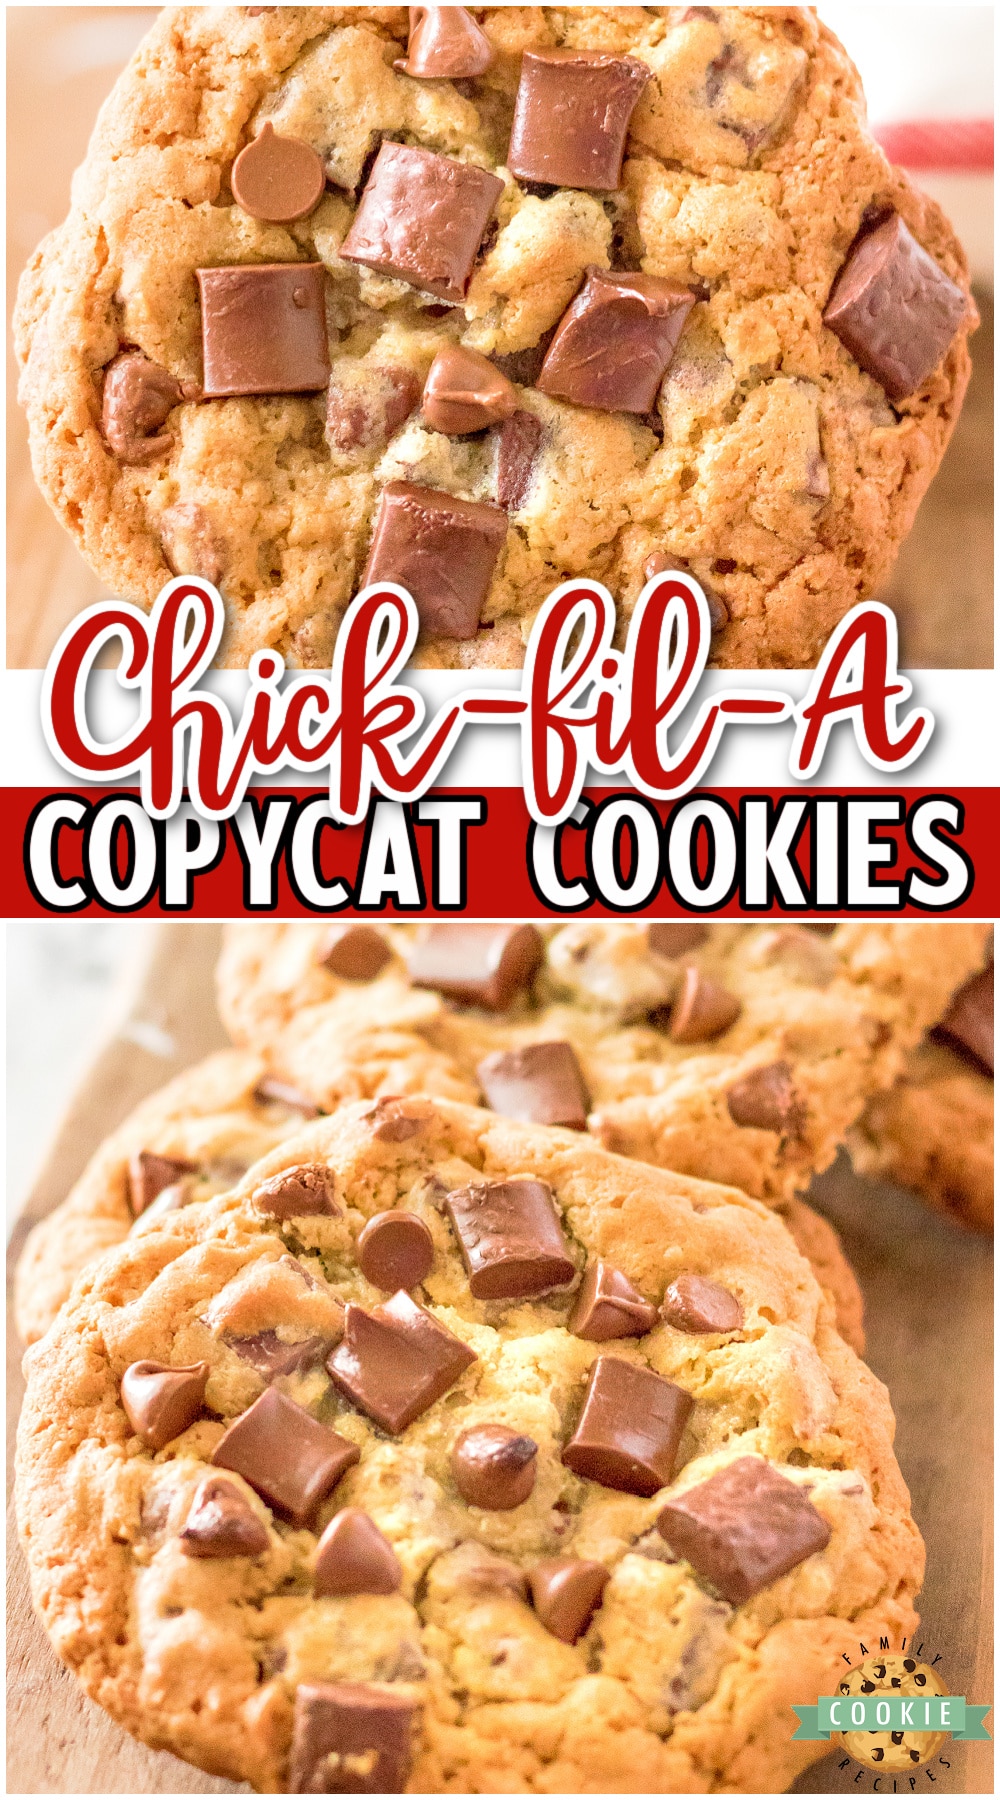 Copycat Chick-fil-A cookies are soft & chewy chocolate chip made even better than the restaurant! Double chocolate chunk cookies that everyone loves! 